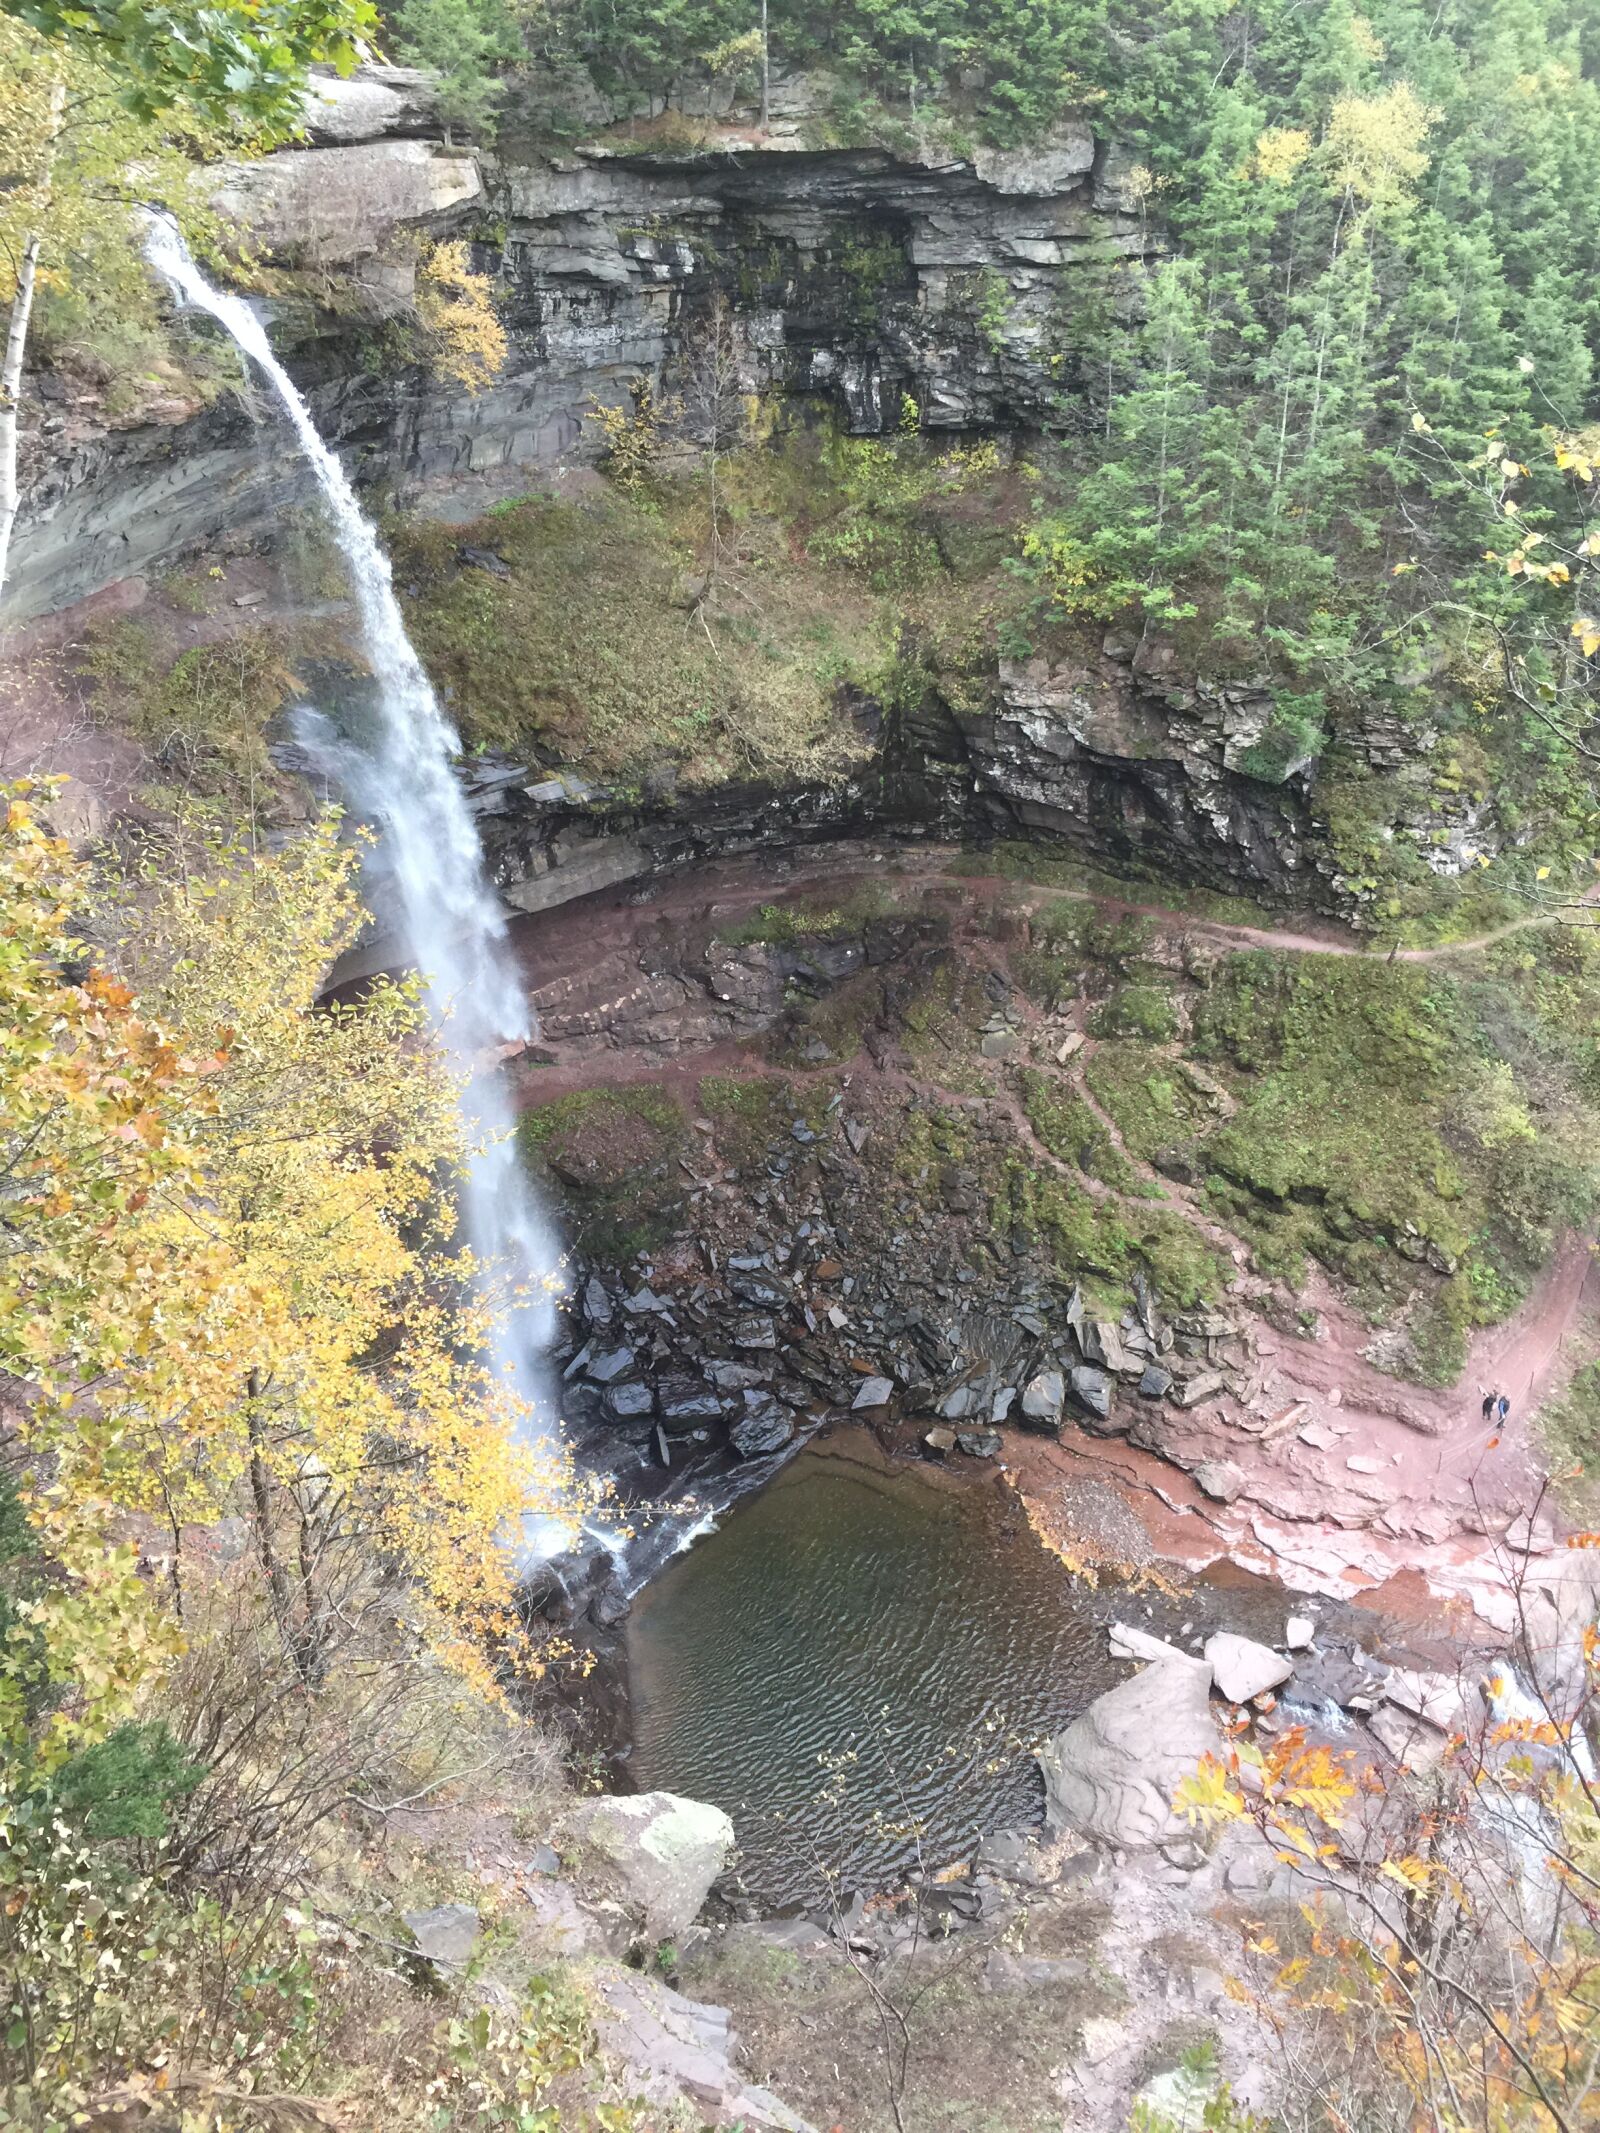 Apple iPhone 6 Plus + iPhone 6 Plus back camera 4.15mm f/2.2 sample photo. Waterfall, kaaterskill wild forest photography